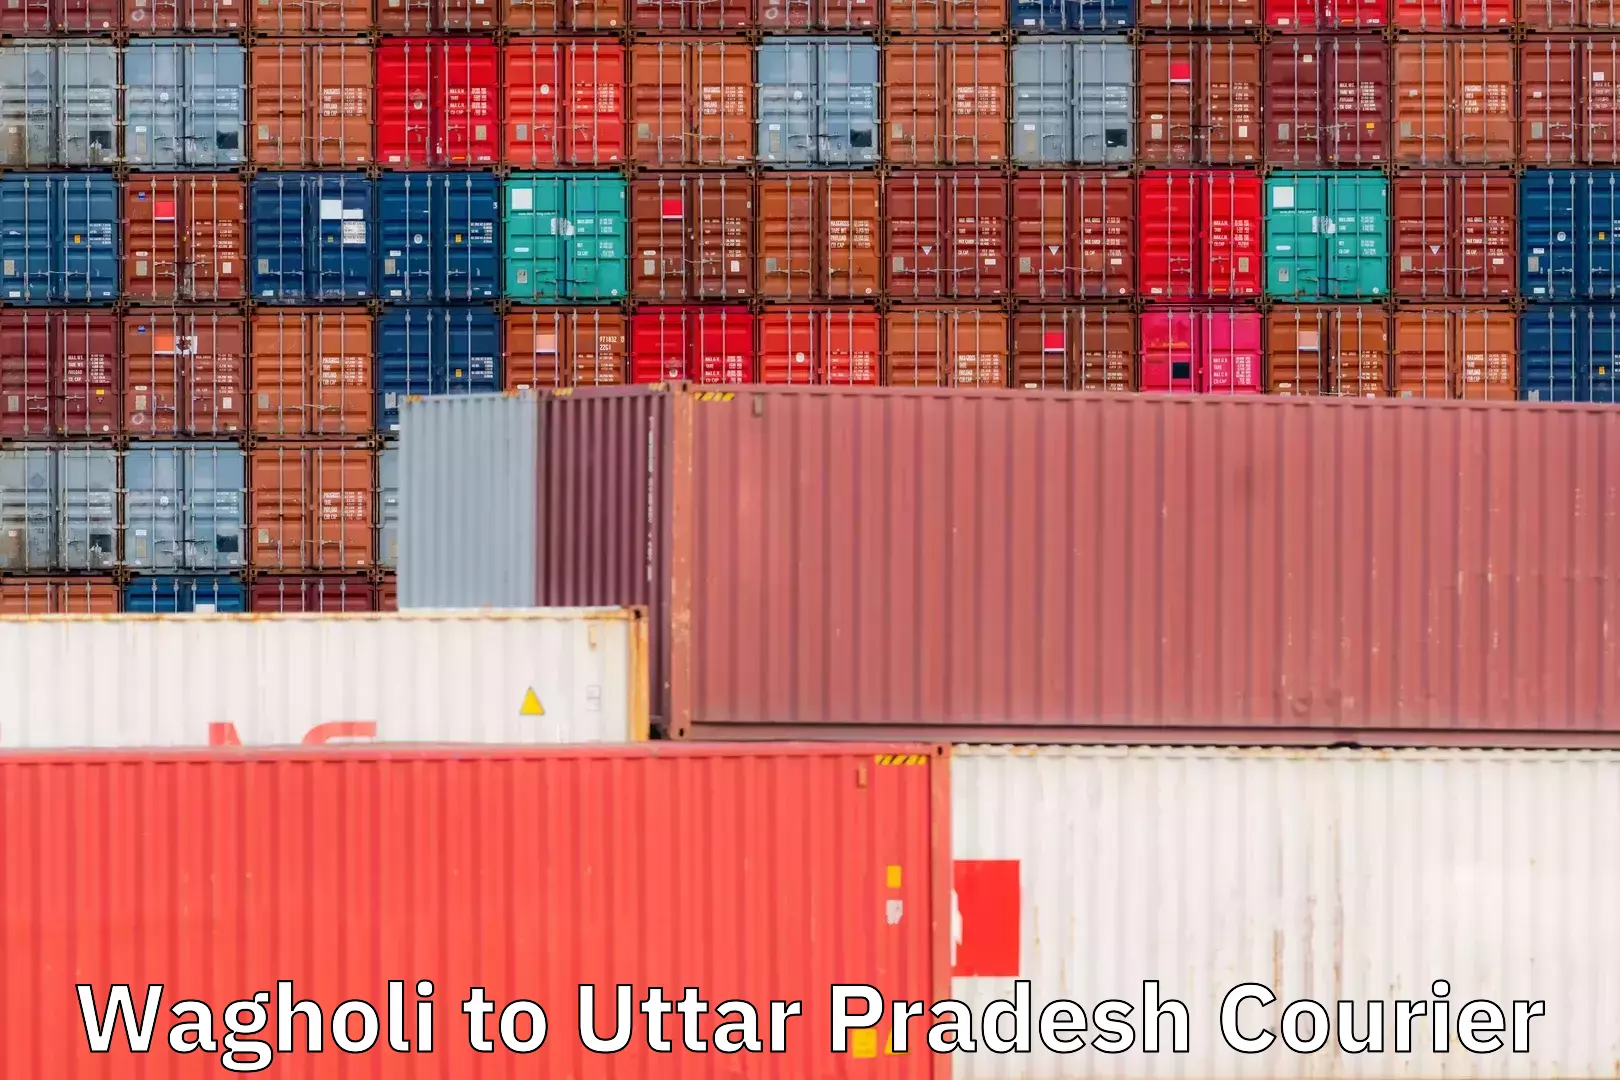 State-of-the-art courier technology Wagholi to Uttar Pradesh